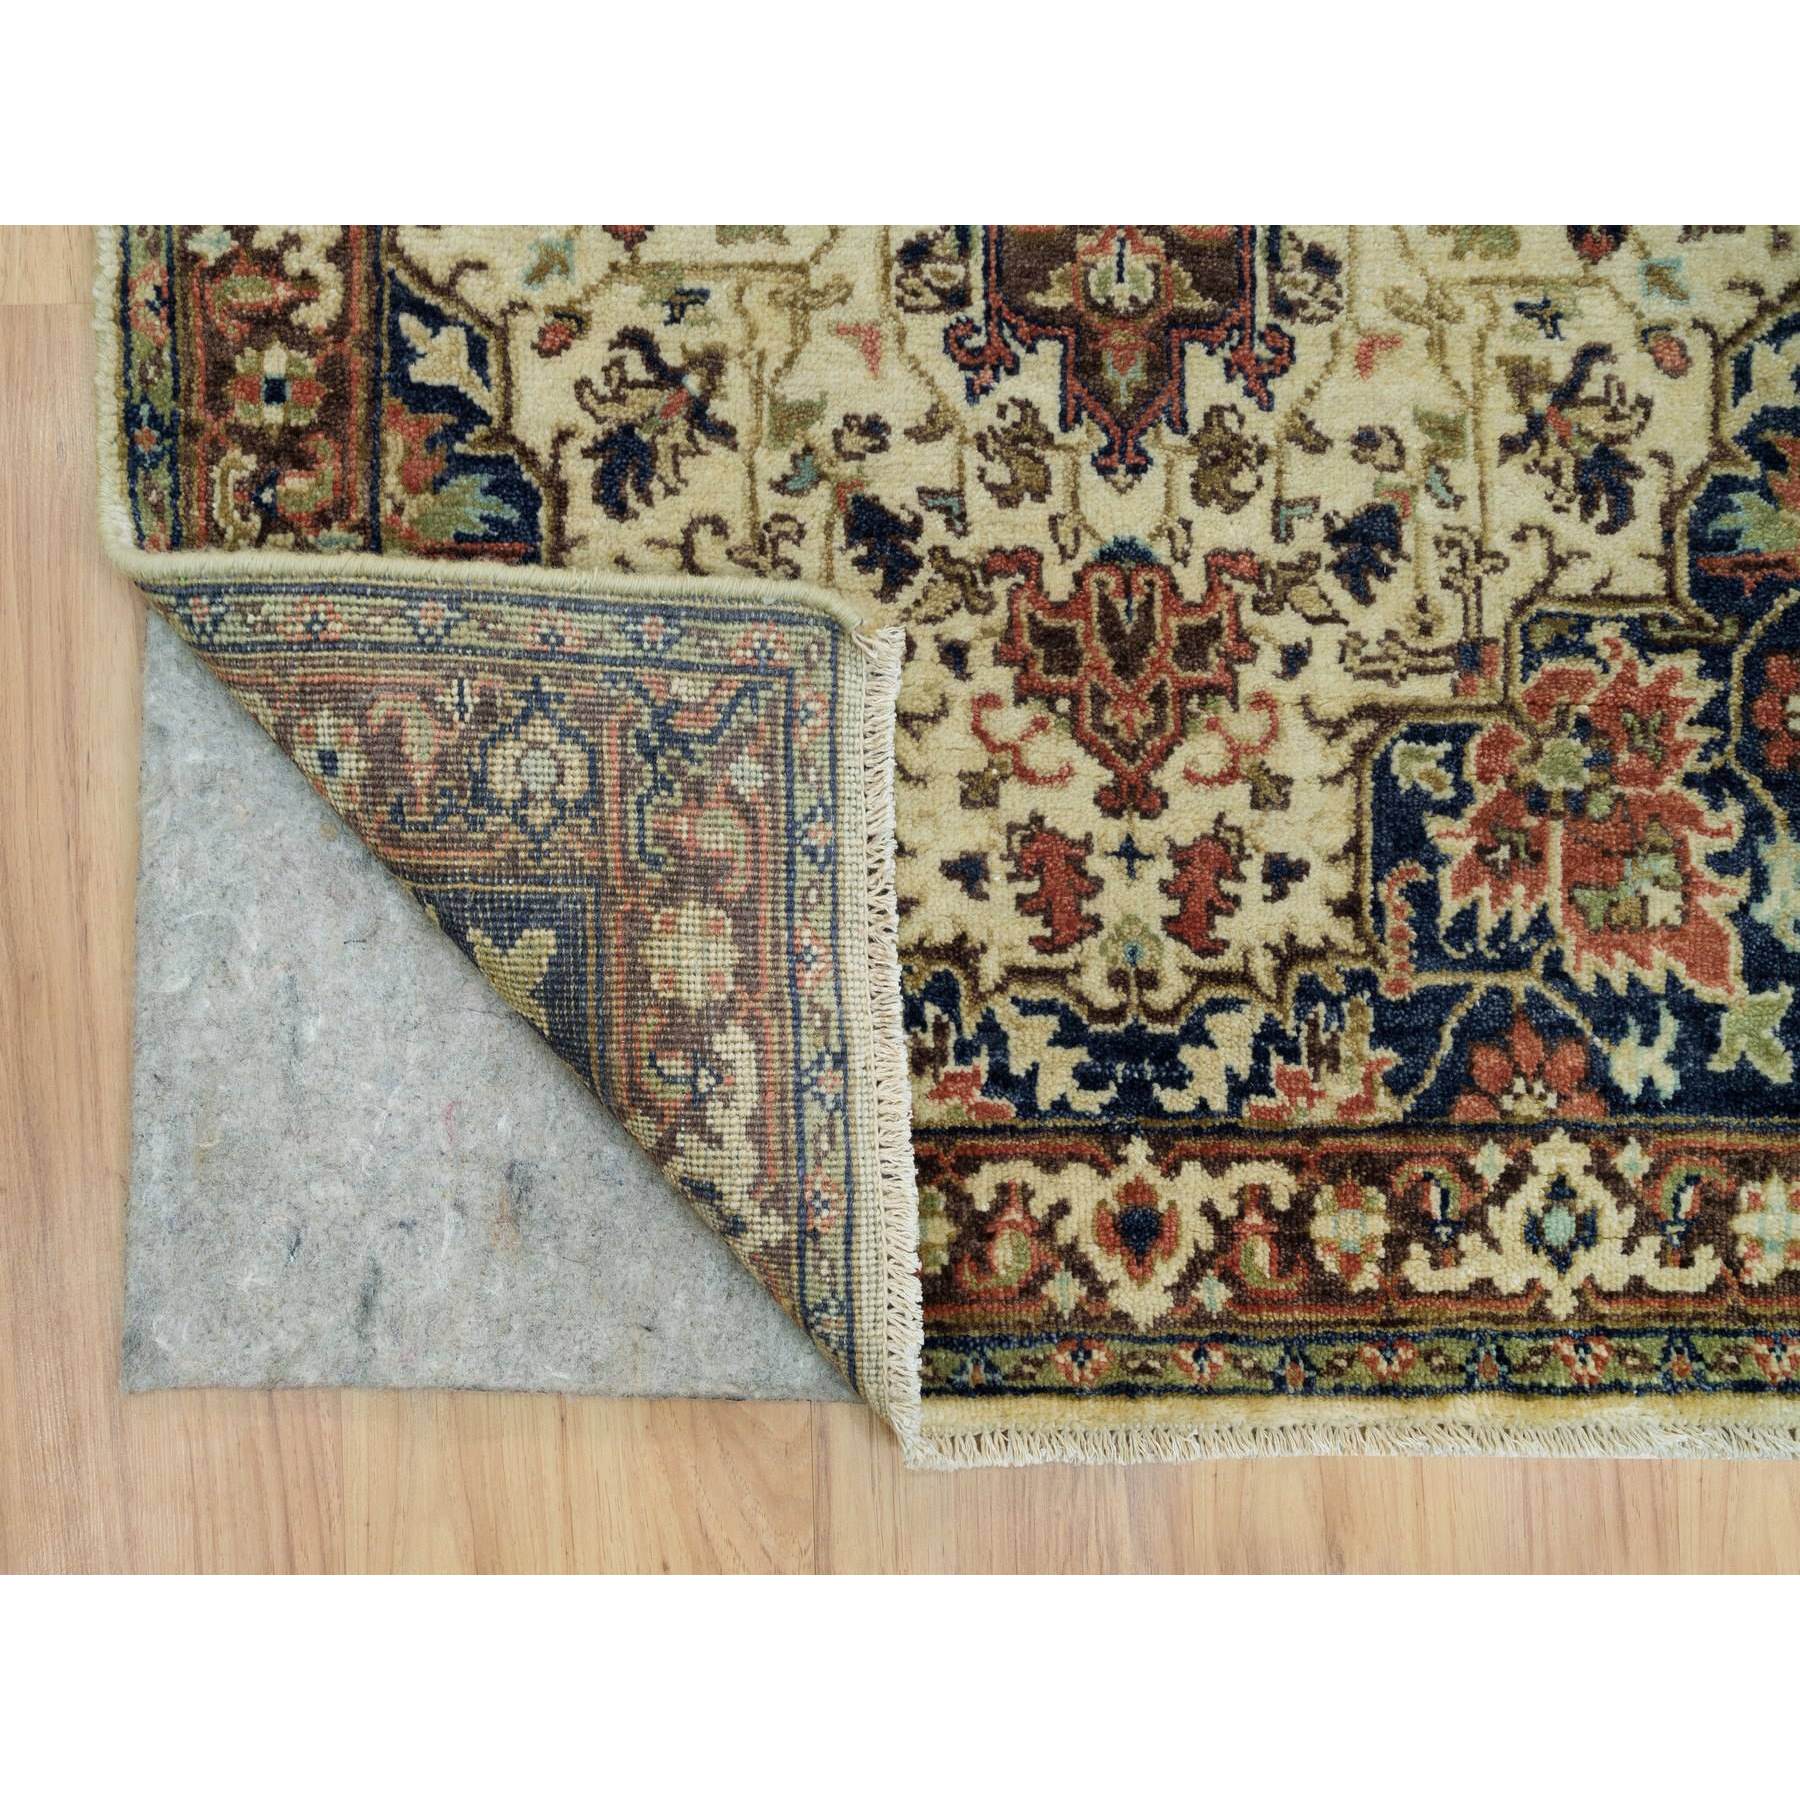 2'8"x6'1" Egg Shell Beige, Hand Woven Antiqued Fine Heriz Re-Creation, Natural Dyes, Densely Woven, Soft Pile, Natural Wool, Runner Oriental Rug 